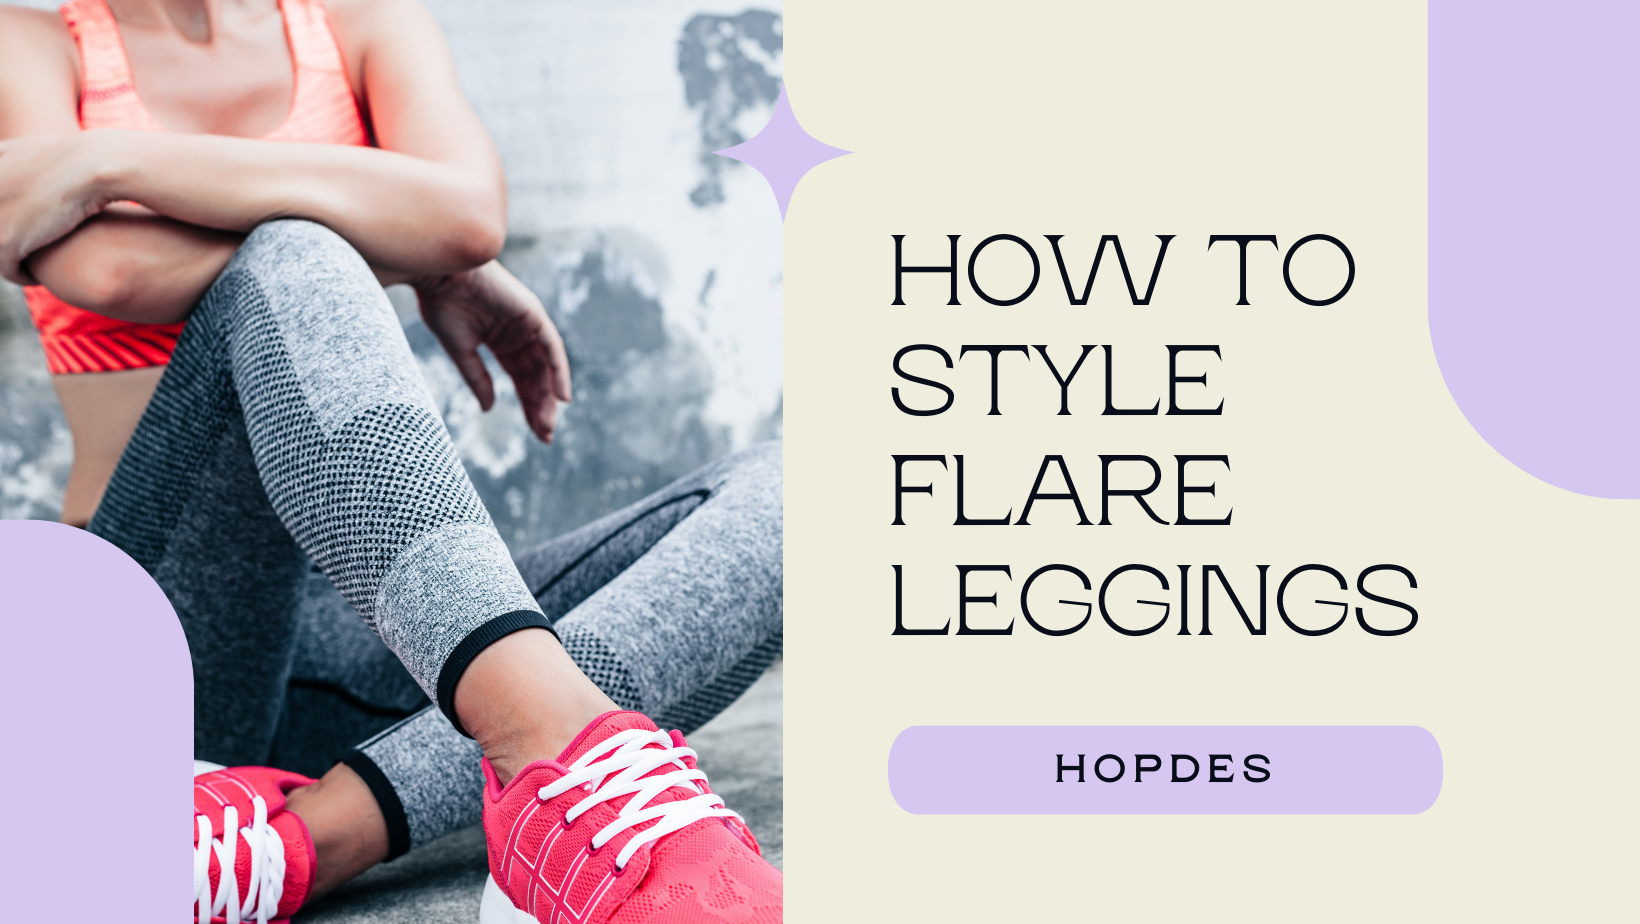 What to Wear with Flare Leggings